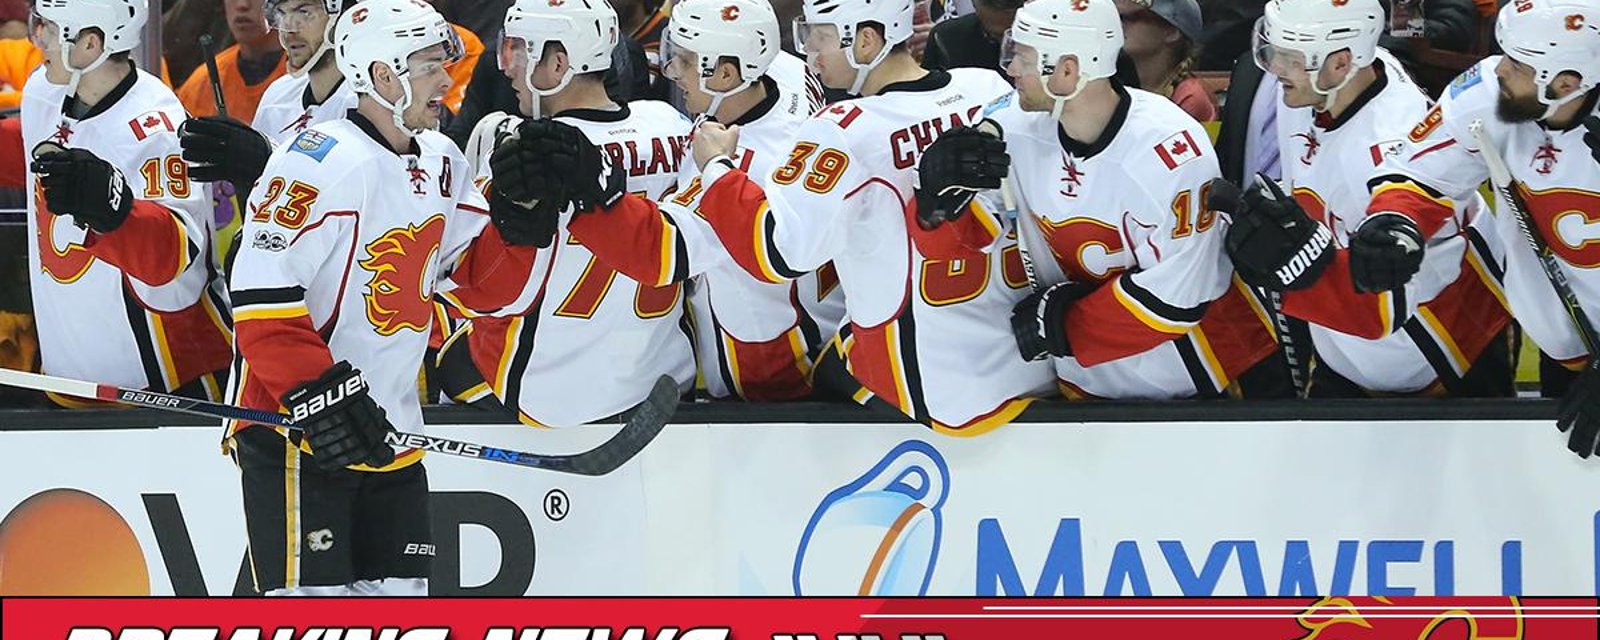 Breaking: Bad news for the Flames ahead of tonight's game